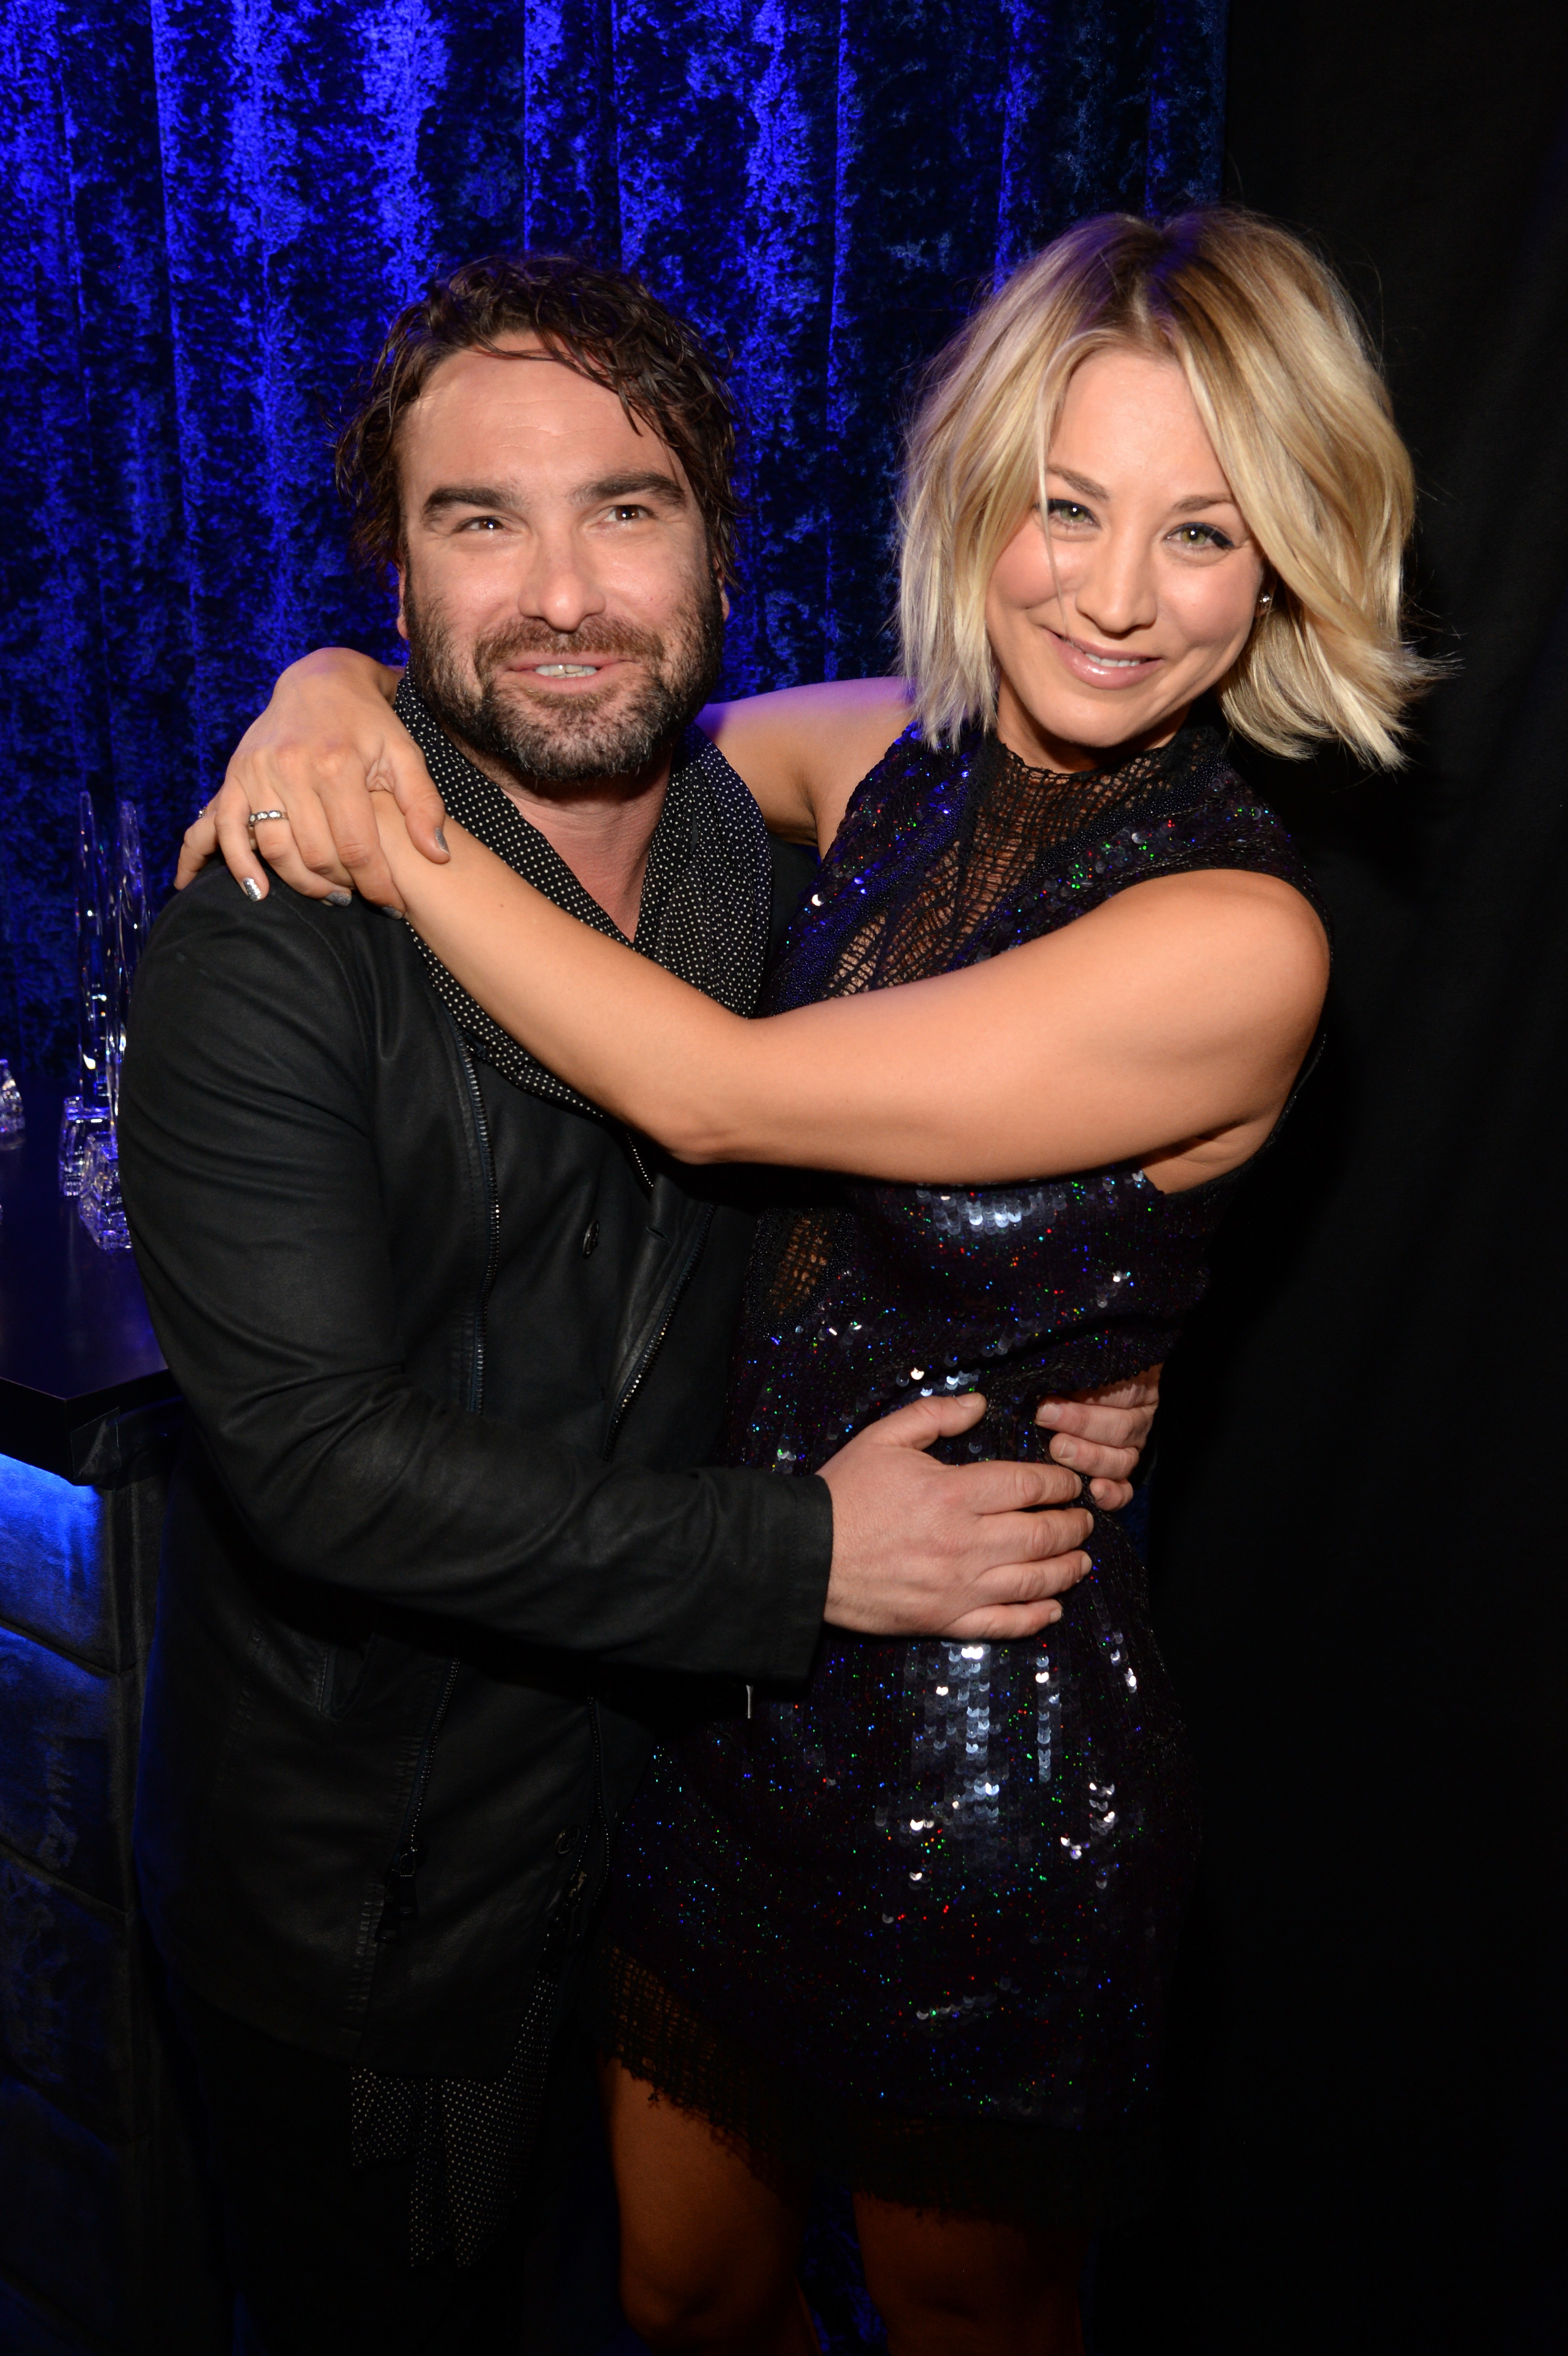 Kaley and Johnny smiling and embracing